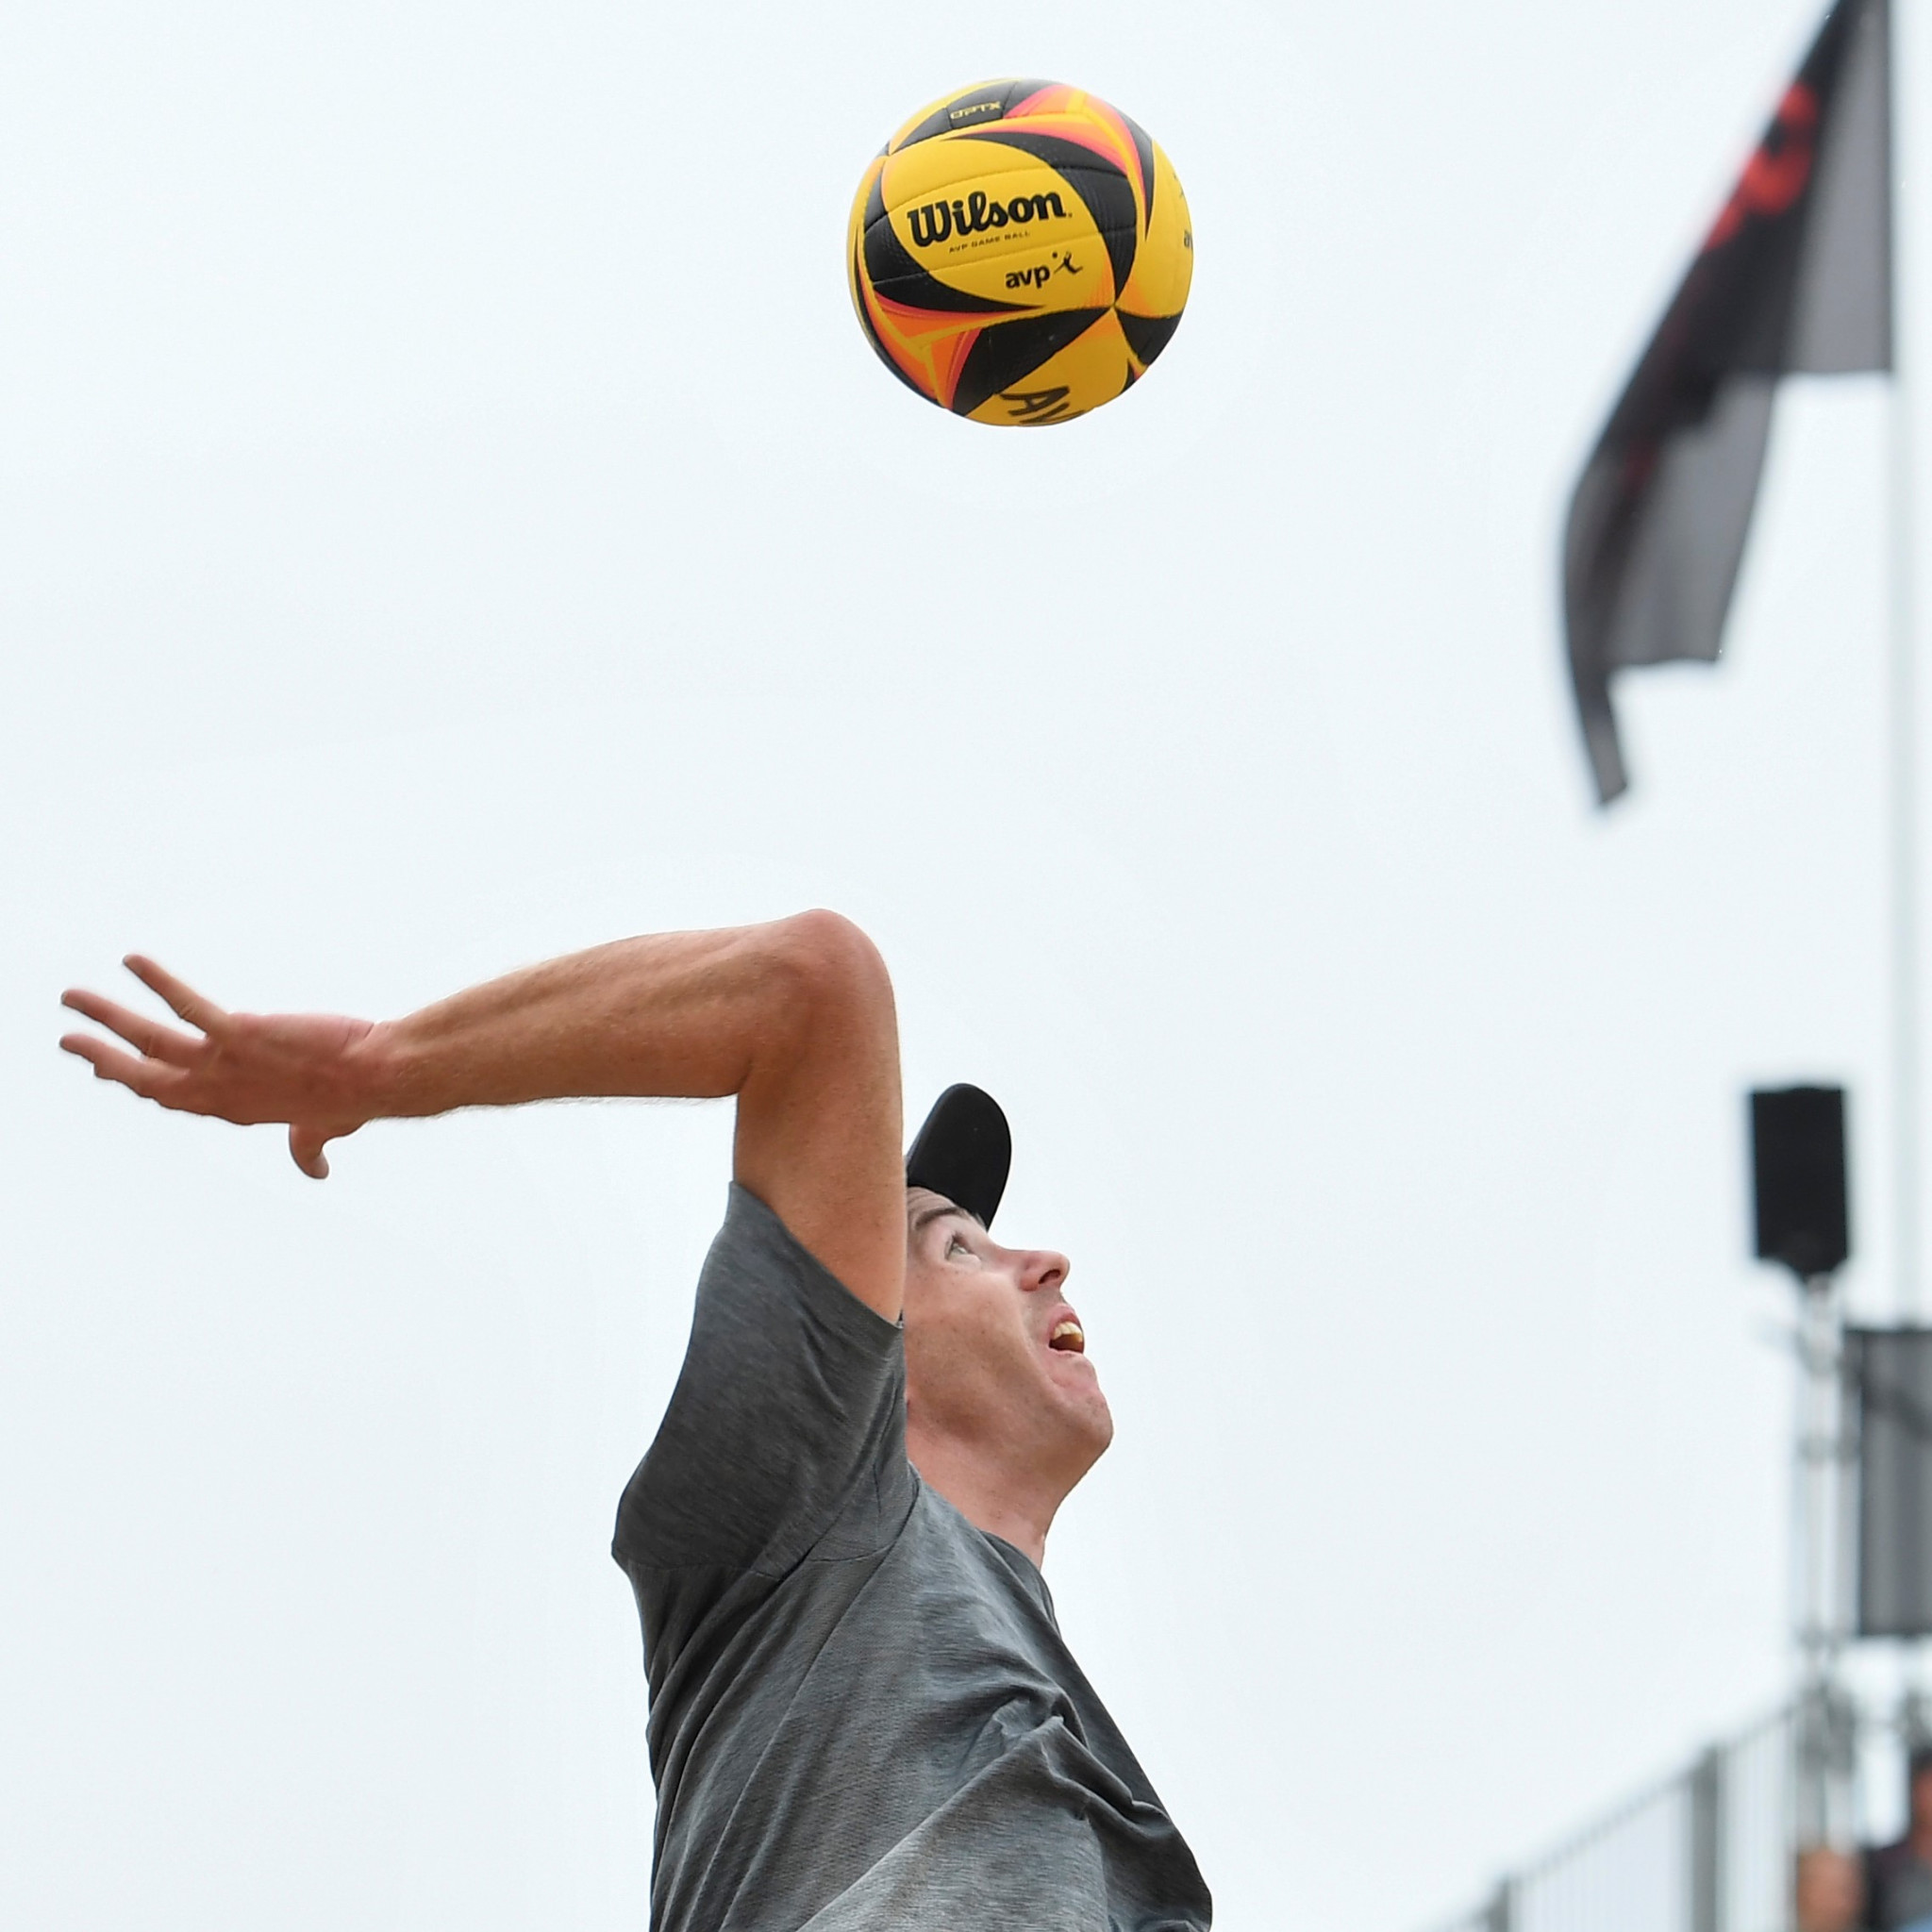 Olympic champions defeated as Benesh and Partain claim gold at Beach Volleyball Pro Tour event in Gstaad